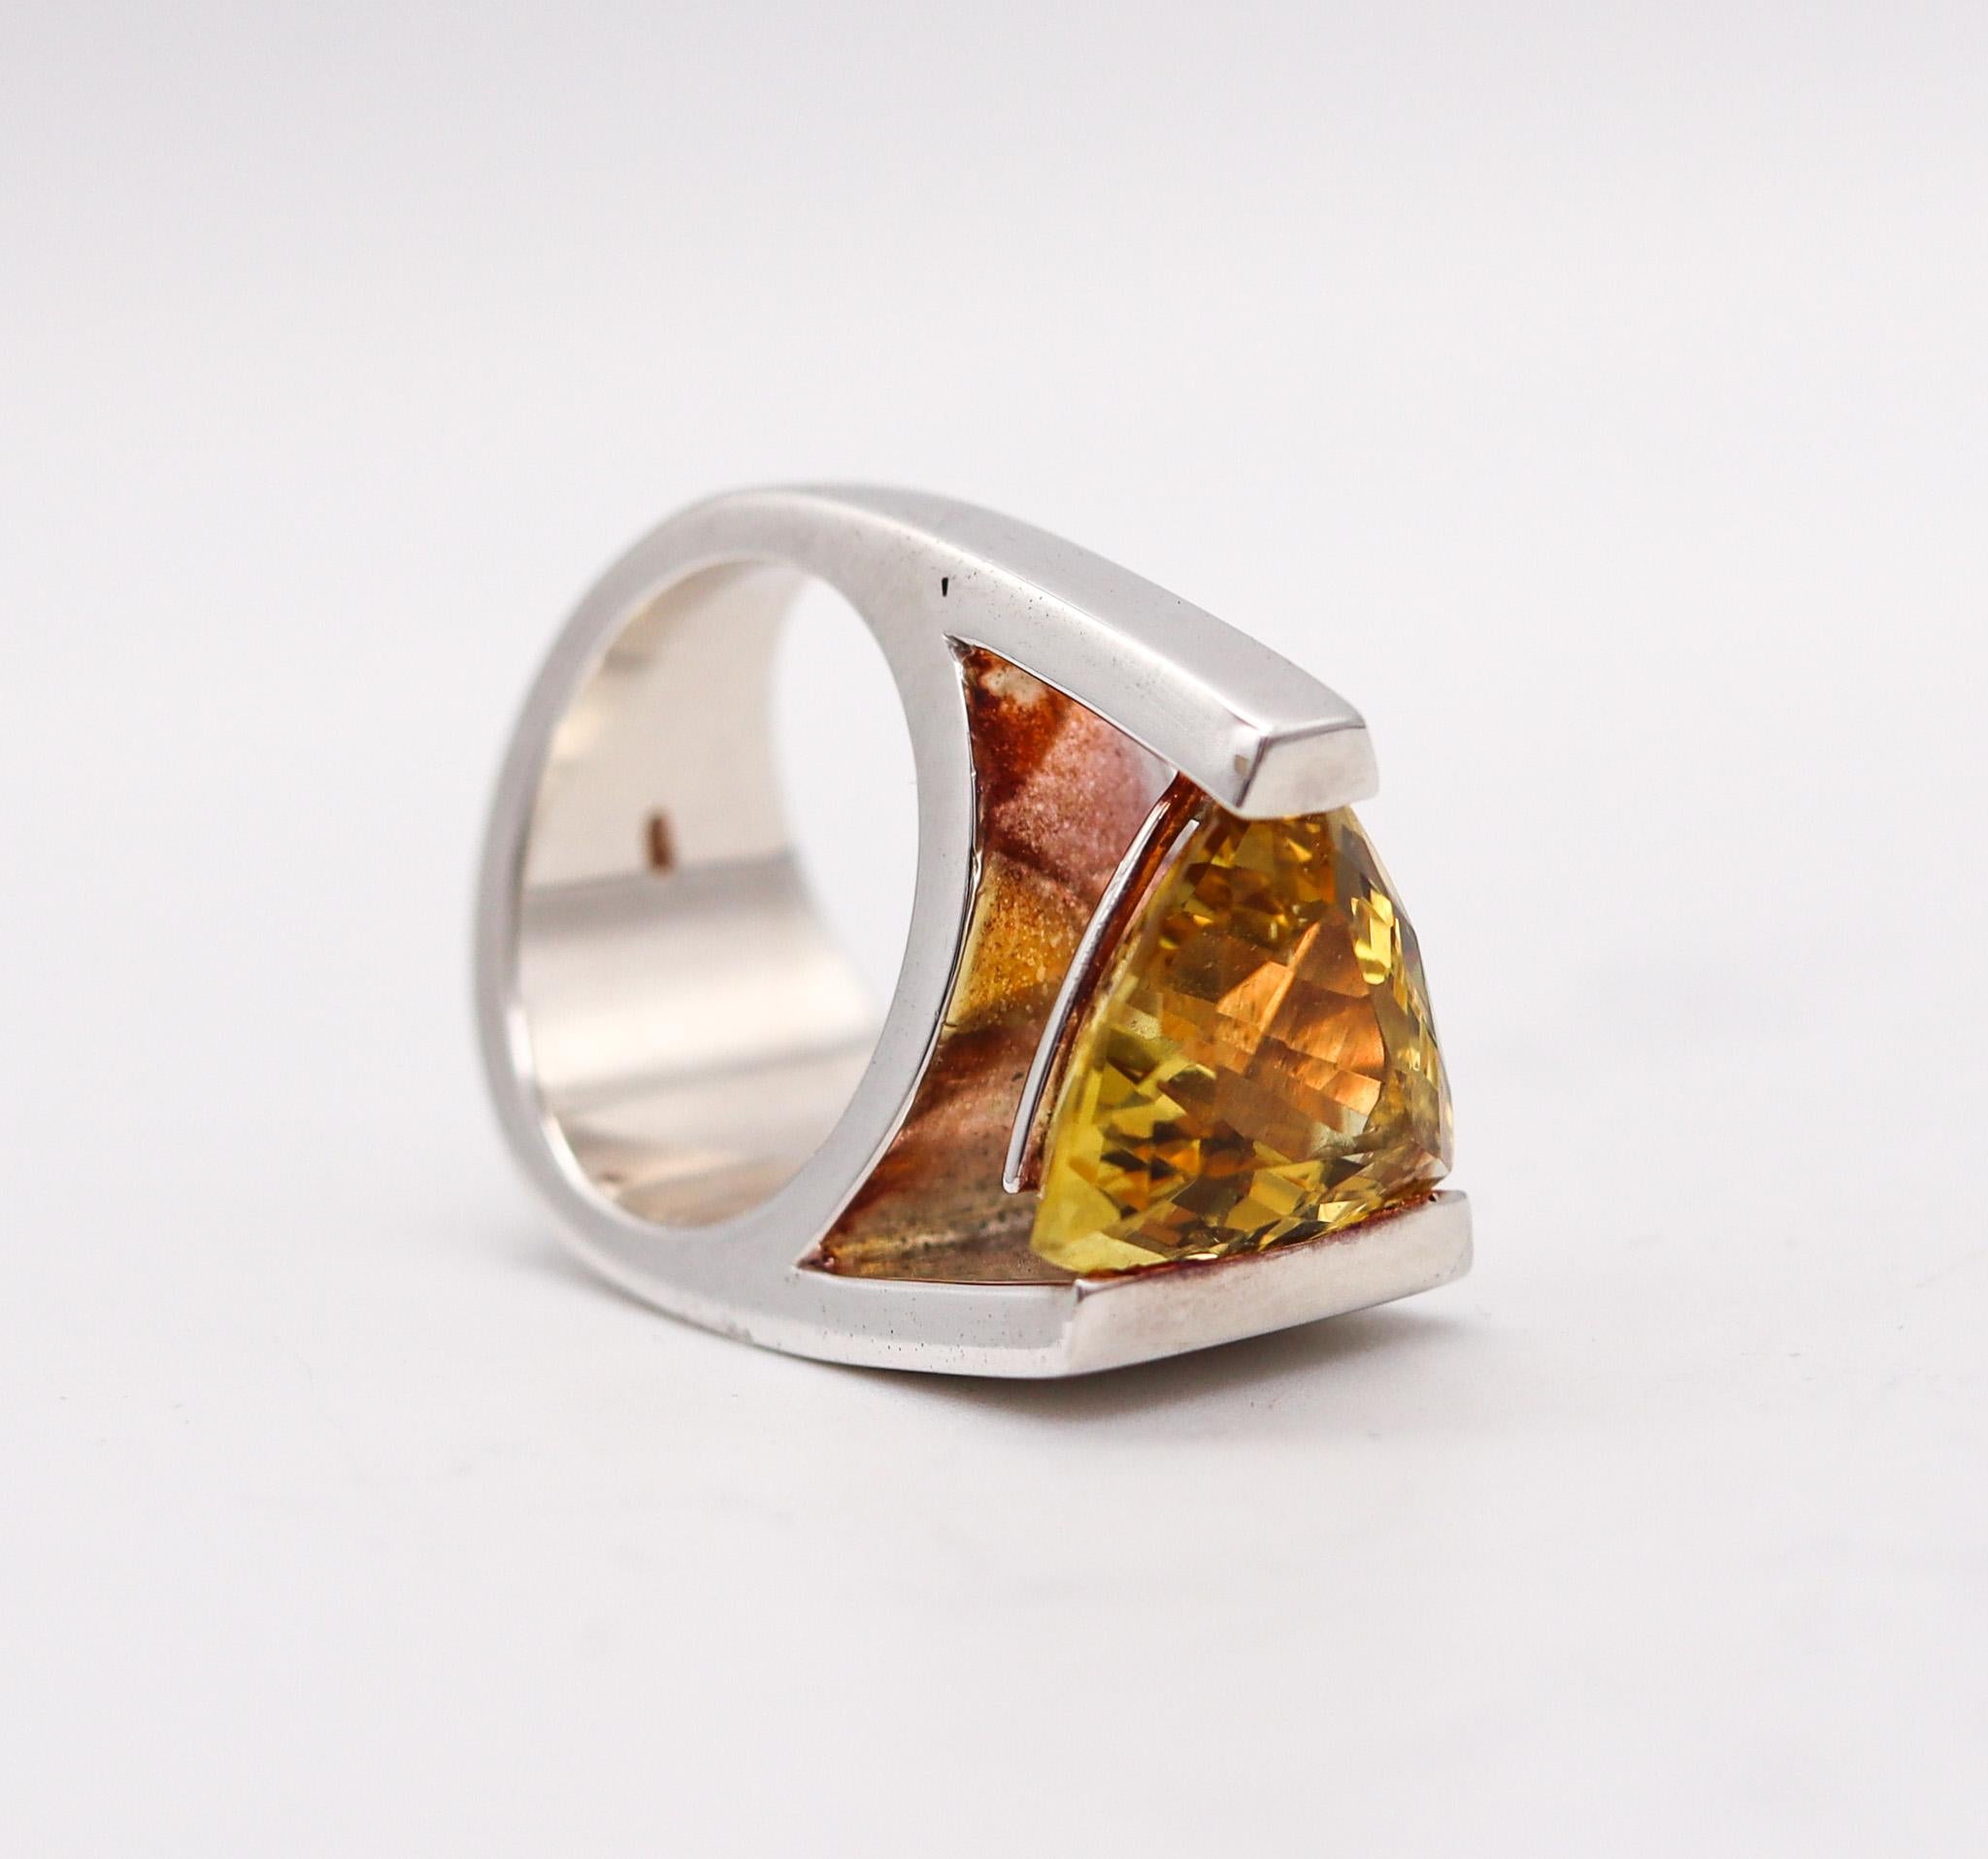 Geometric ring with beryl Heliodor designed by Monica Coscioni. 

Beautiful contemporary cocktail ring, created in the city of Orvieto Italy at the jewelry atelier of the designer Monica Coscioni. This modern geometric piece has been crafted in